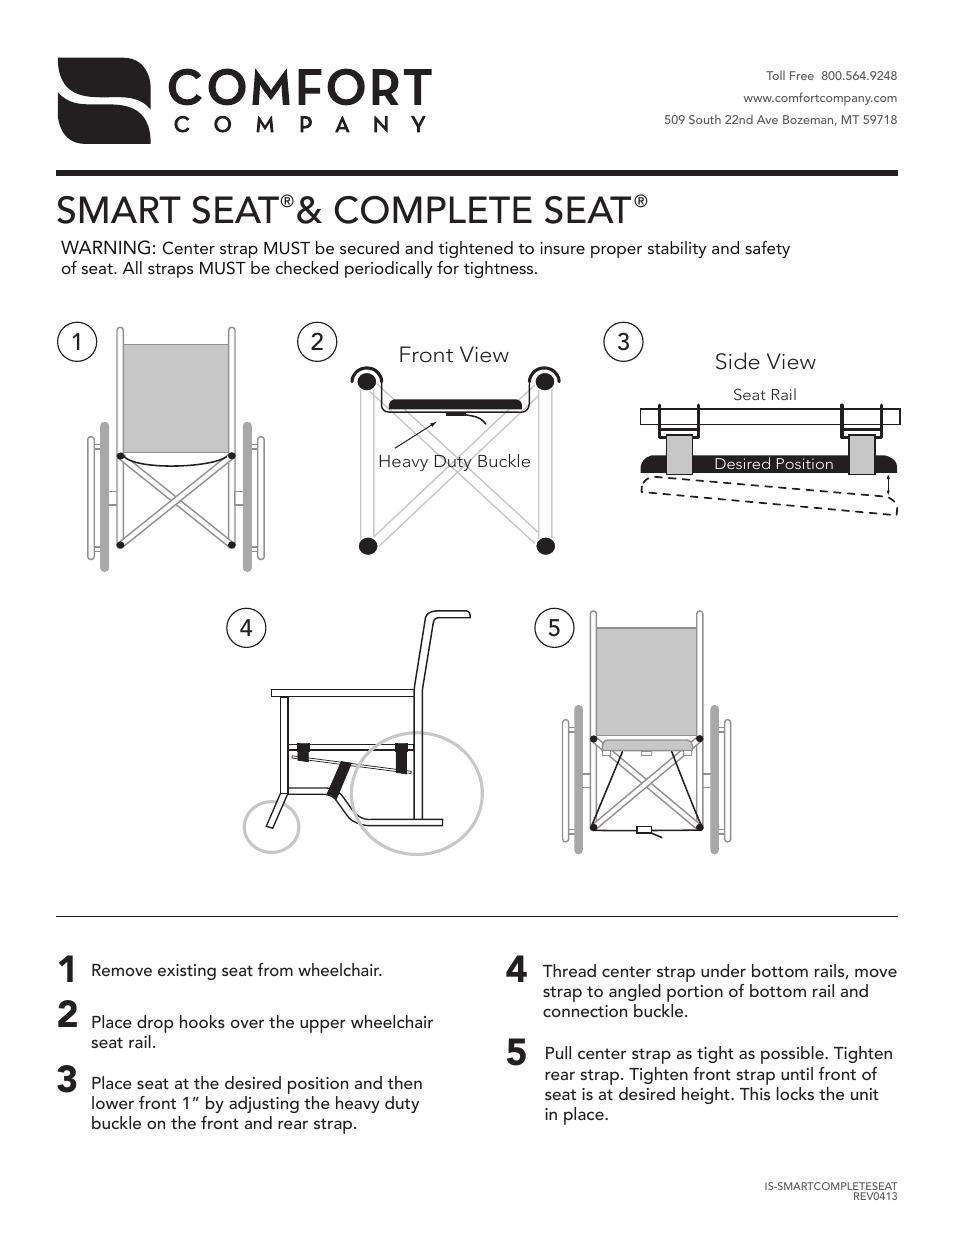 Smart Seat & Complete Seat